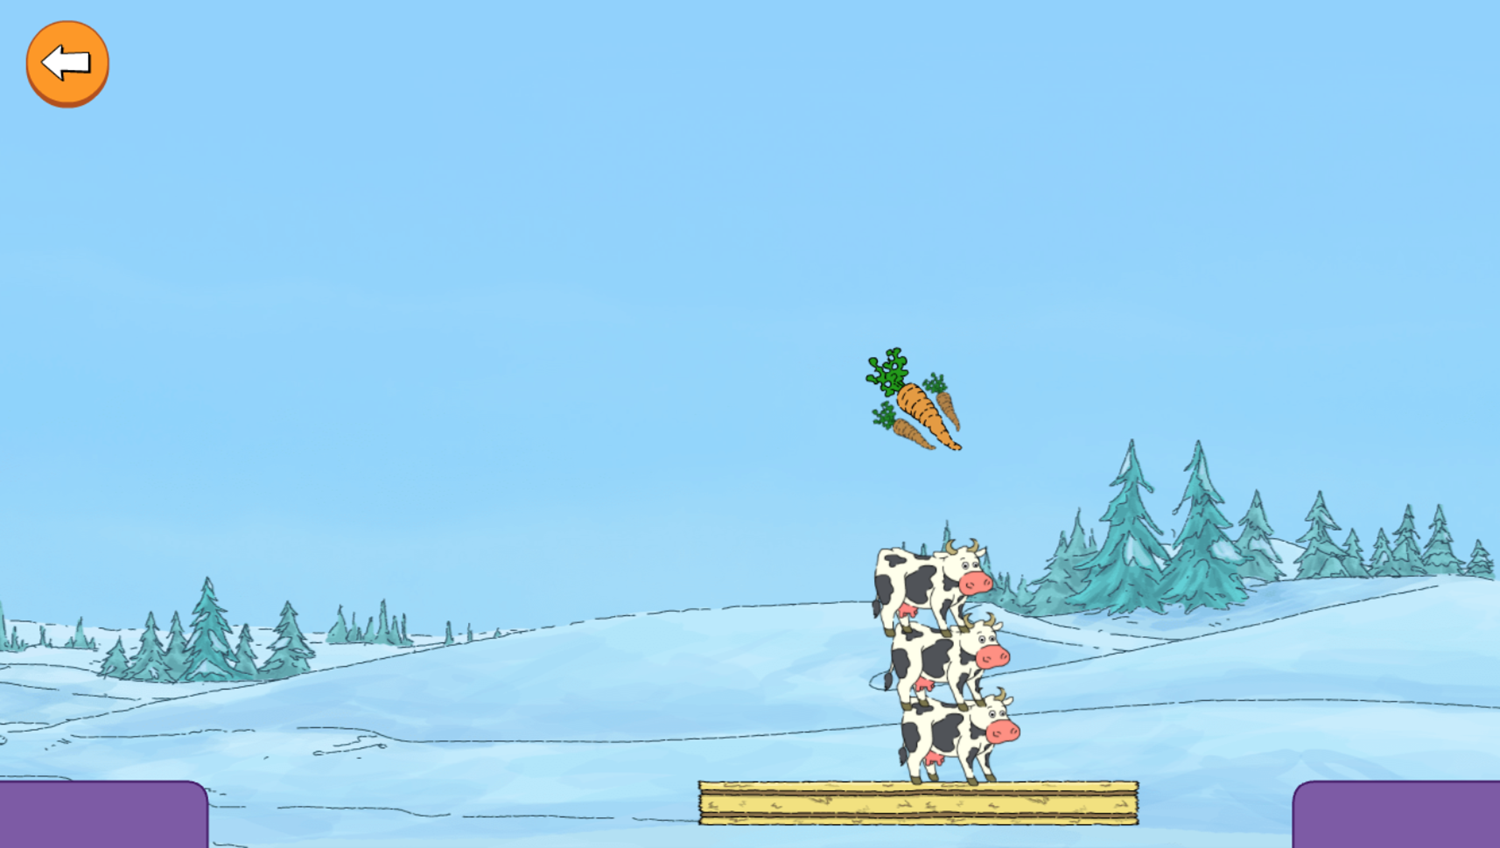 Arthur Tower of Cows Game Move Gameplay Screenshot.